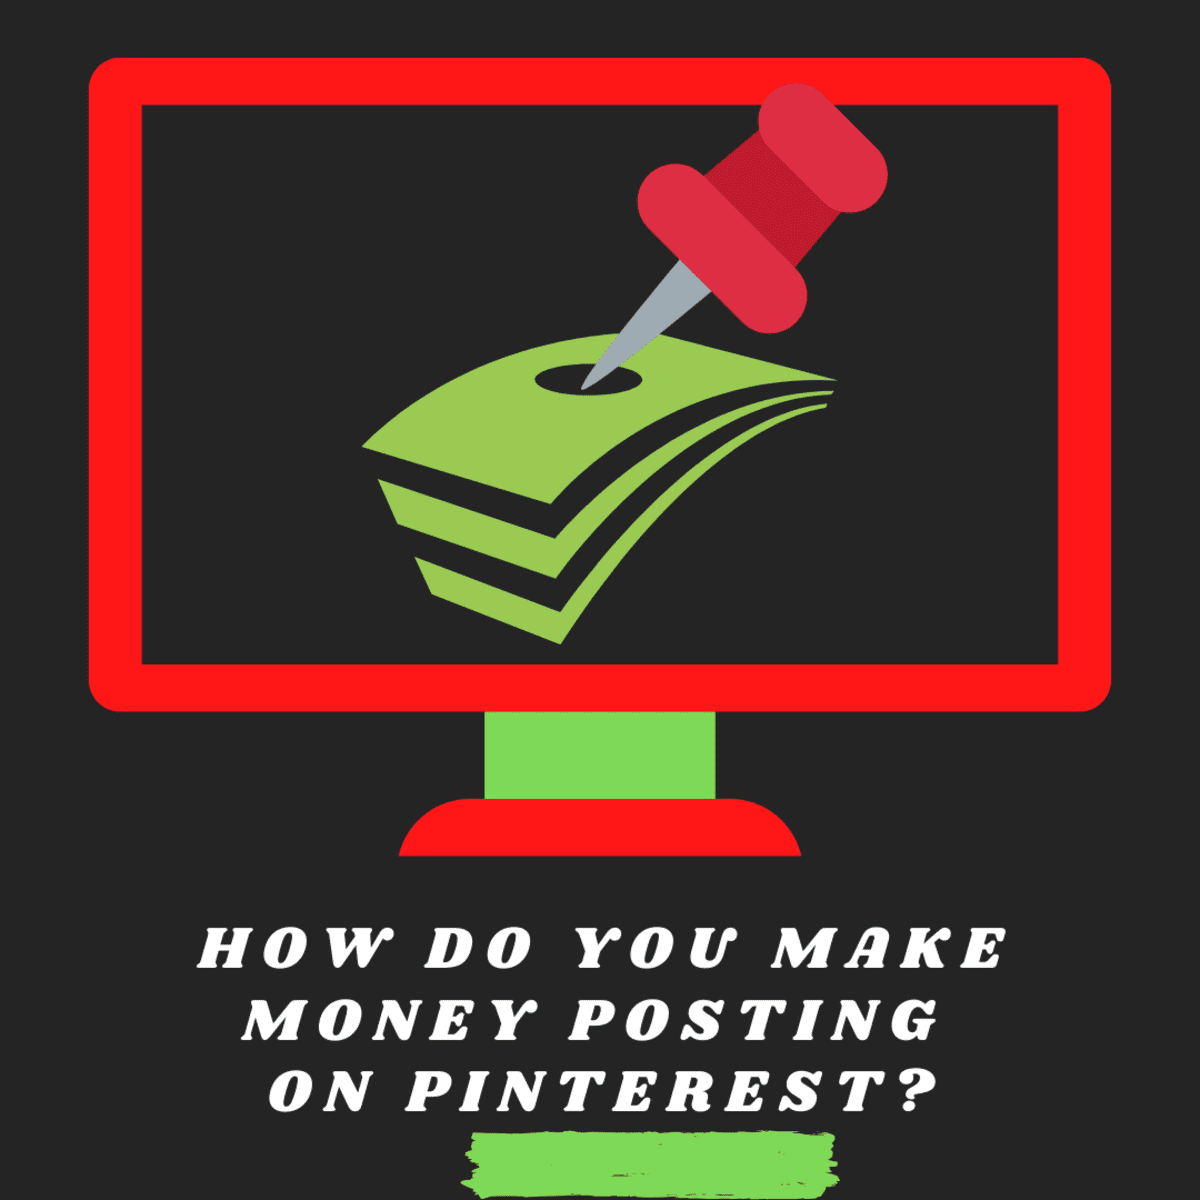 How Do You Make Money Posting on Pinterest? - ToughNickel